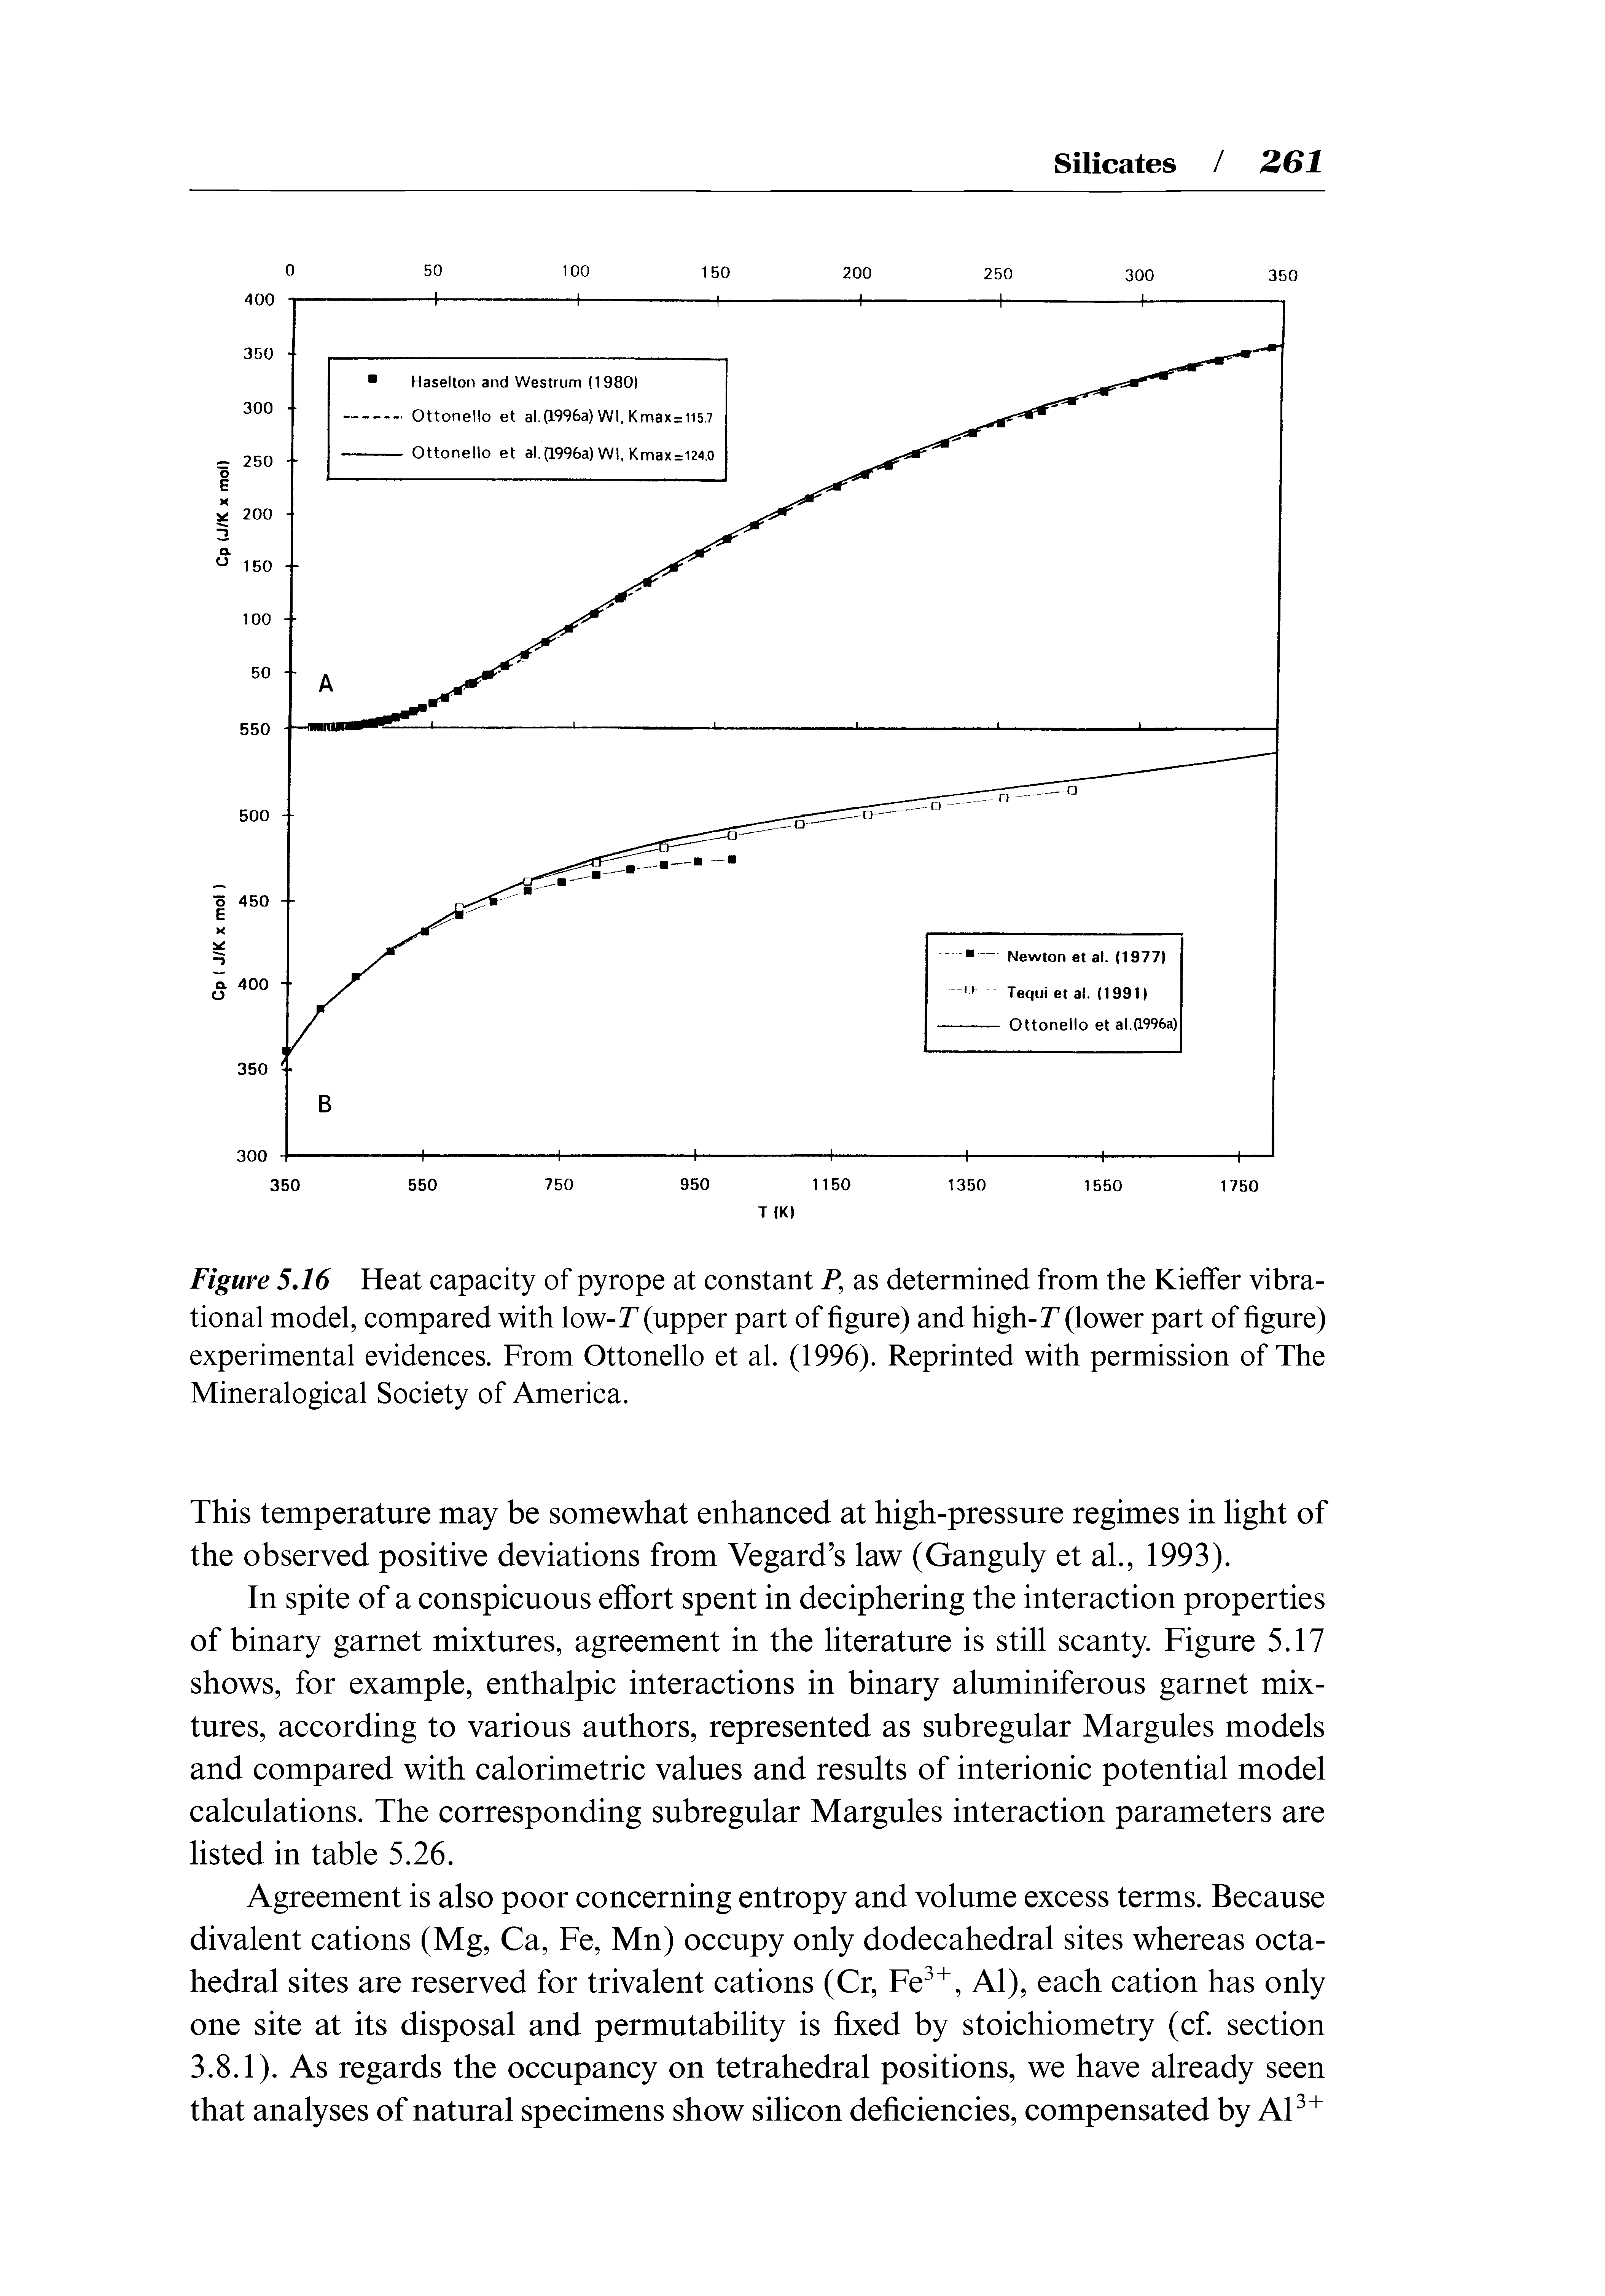 Figure 5.16 Heat capacity of pyrope at constant P, as determined from the Kieffer vibrational model, compared with low-P (upper part of figure) and high-P (lower part of figure) experimental evidences. From Ottonello et al. (1996). Reprinted with permission of The Mineralogical Society of America.